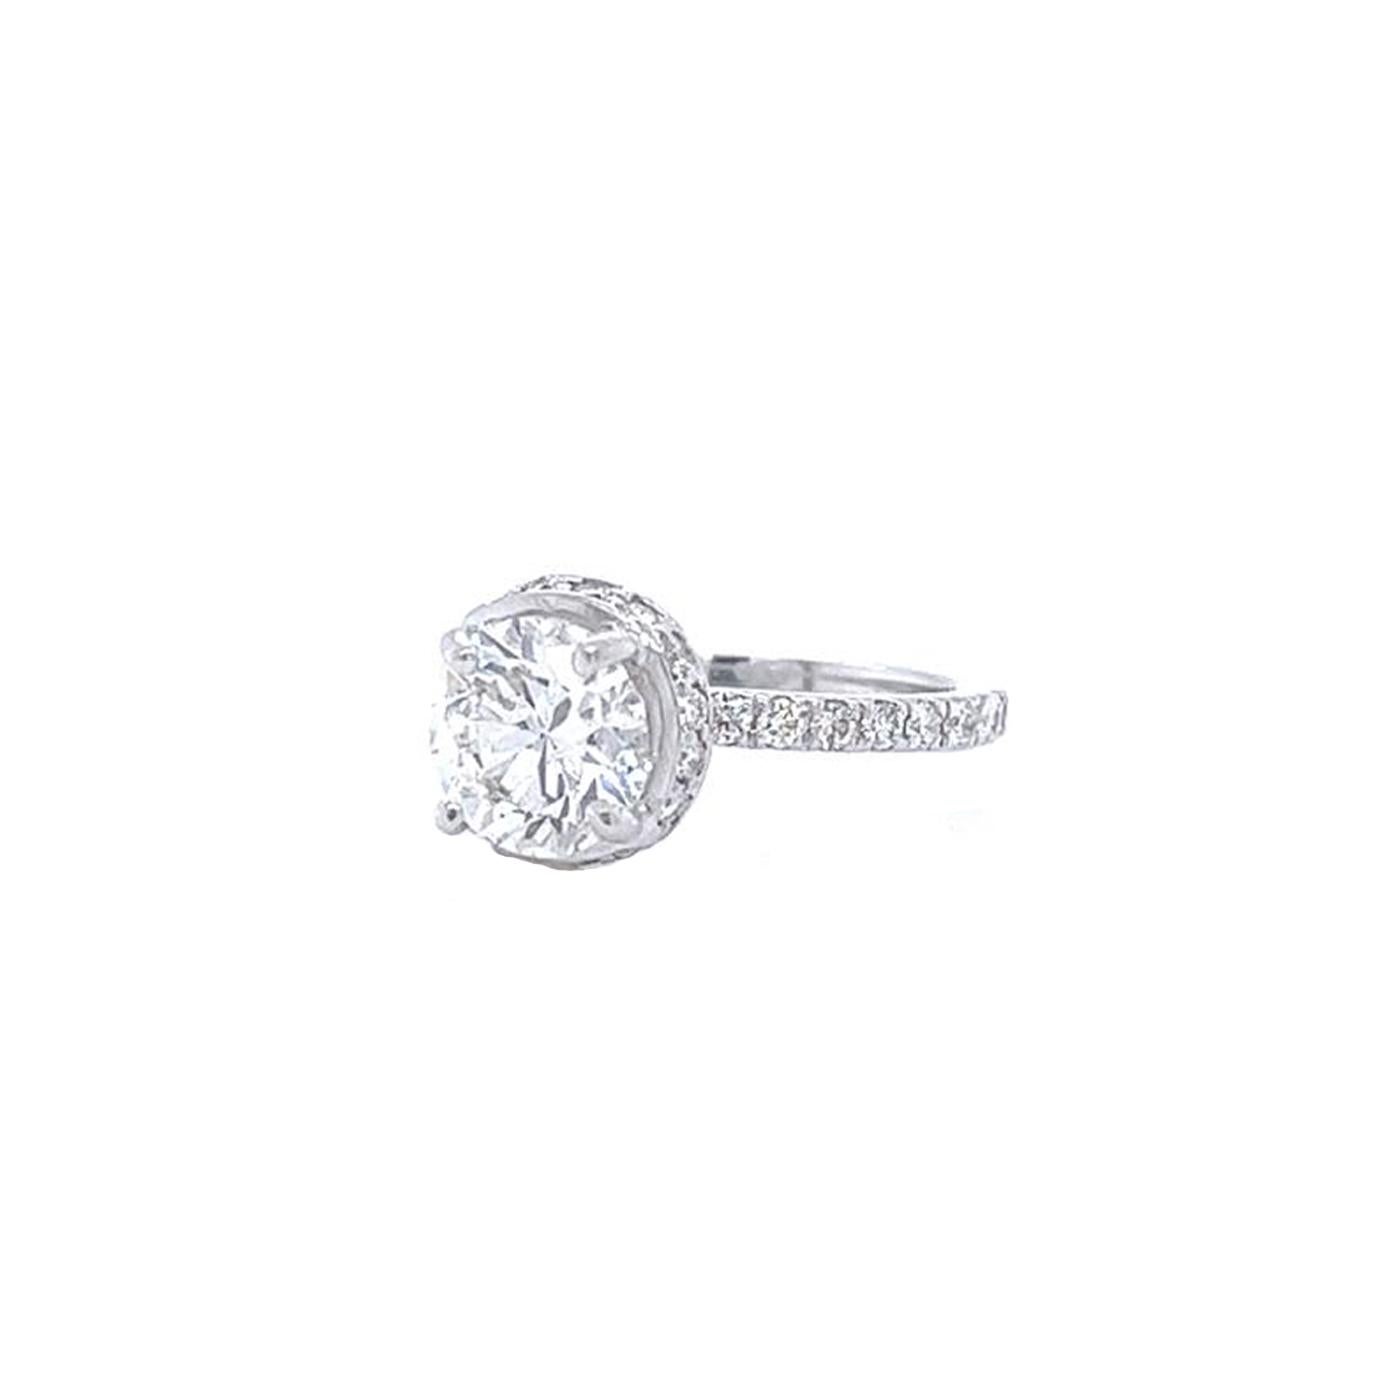 This Stunning Diamond ring is accompanied by a GIA Graded and Certified report certifying that 1.50 Carat  Round Brilliant cut Natural Si1 clarity Diamond Ring is made in 18 Karat White Gold, This ring will be perfect for your special one, This